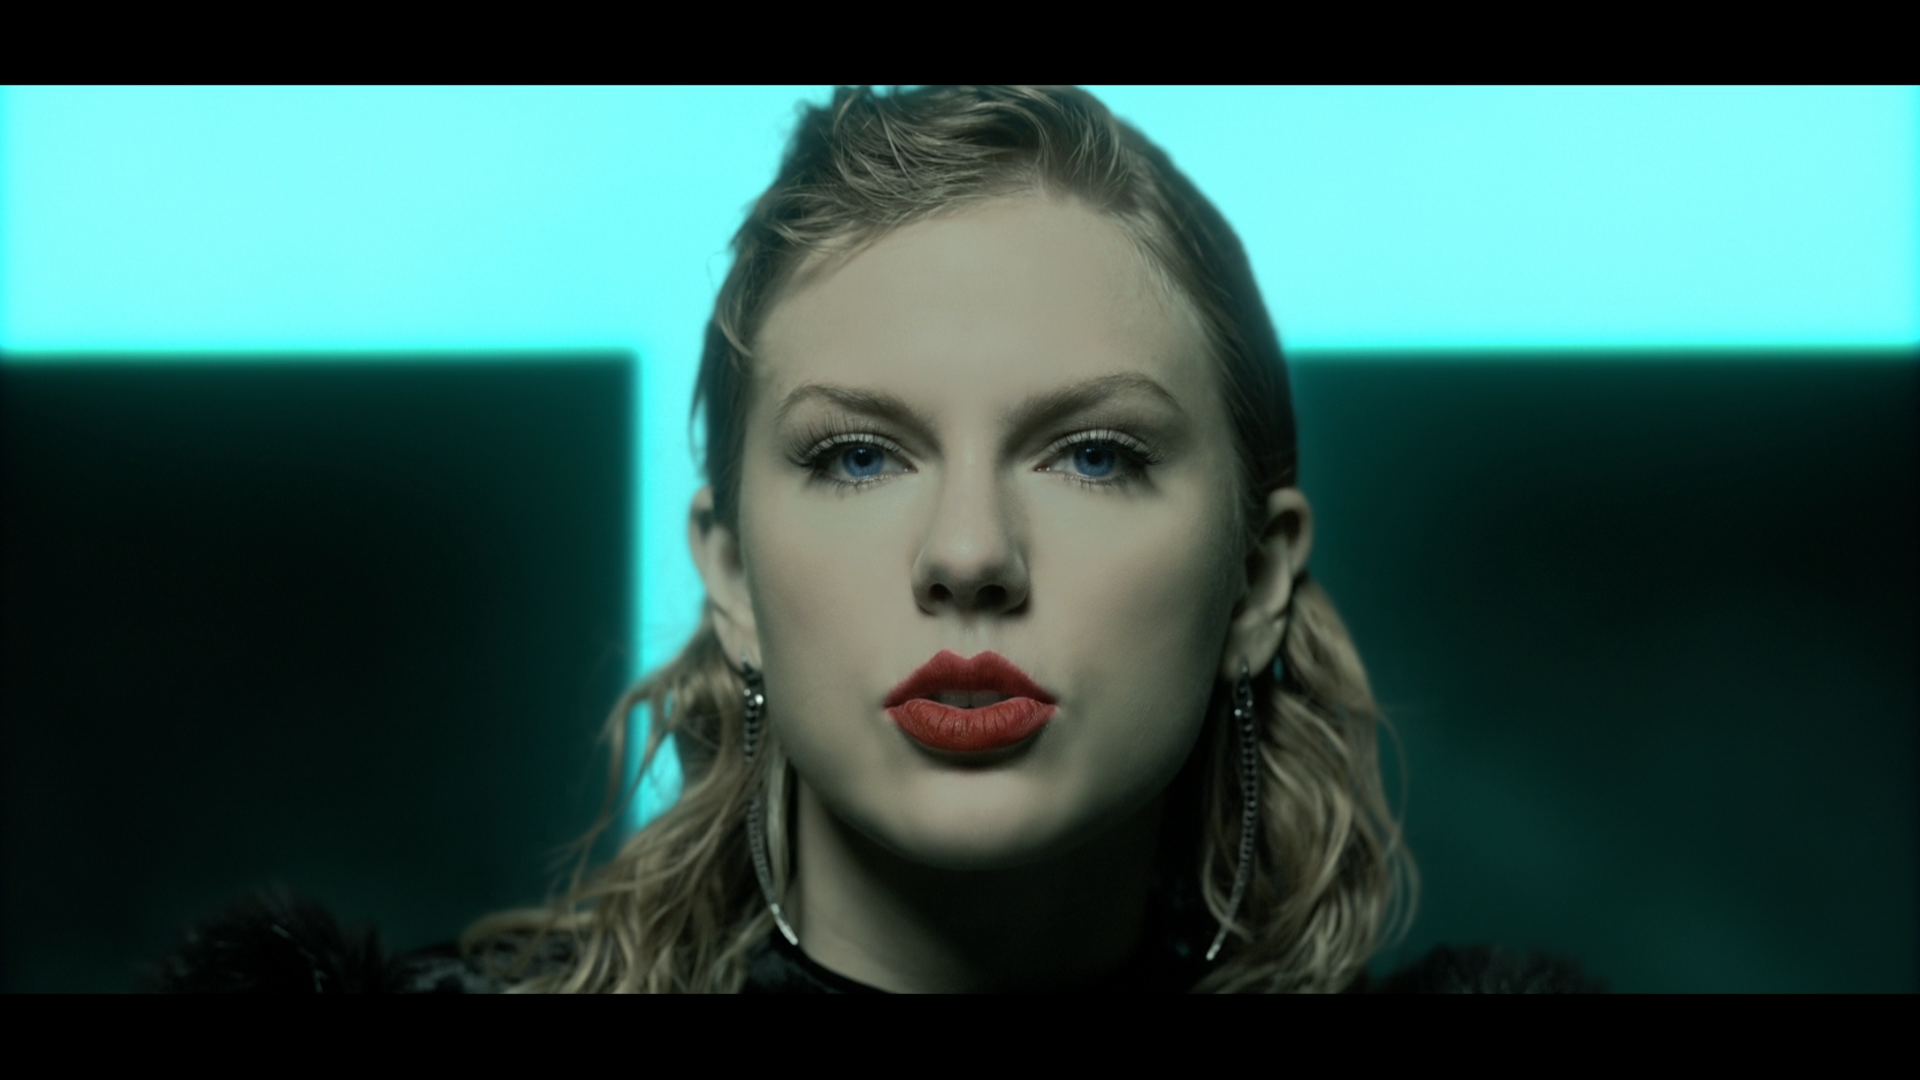 Тейлор Свифт look what you made me do. Taylor Swift 2023. Taylor Swift LWYMMD. Тейлор Свифт look what you made me do клип. Тейлор свифт look